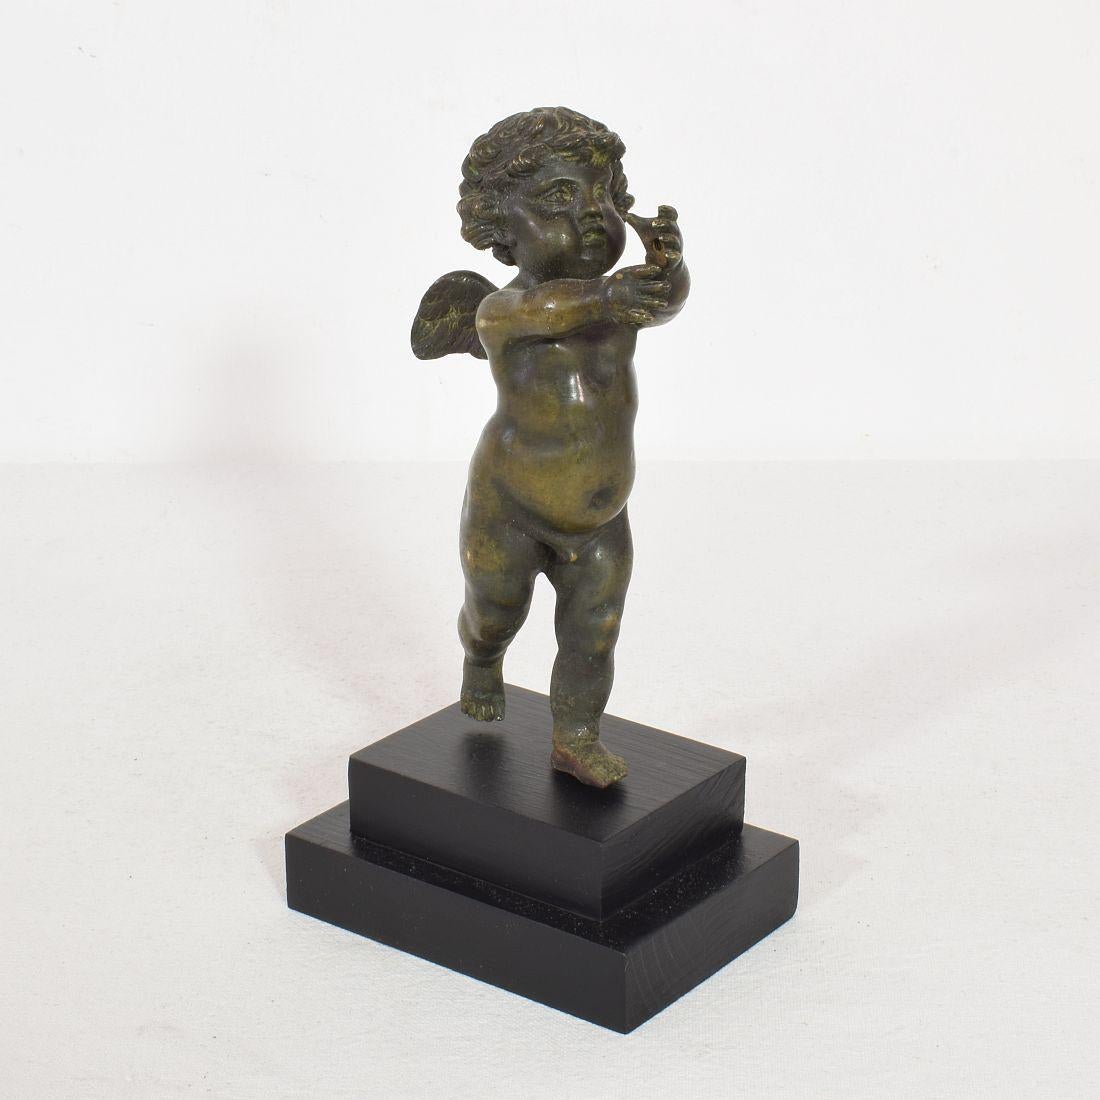 Amazing small treasure. Beautiful small bronze angel. Placed on a wooden base. France circa 1800/1900. Weathered and small losses
Measurement below is inclusive the wooden base.